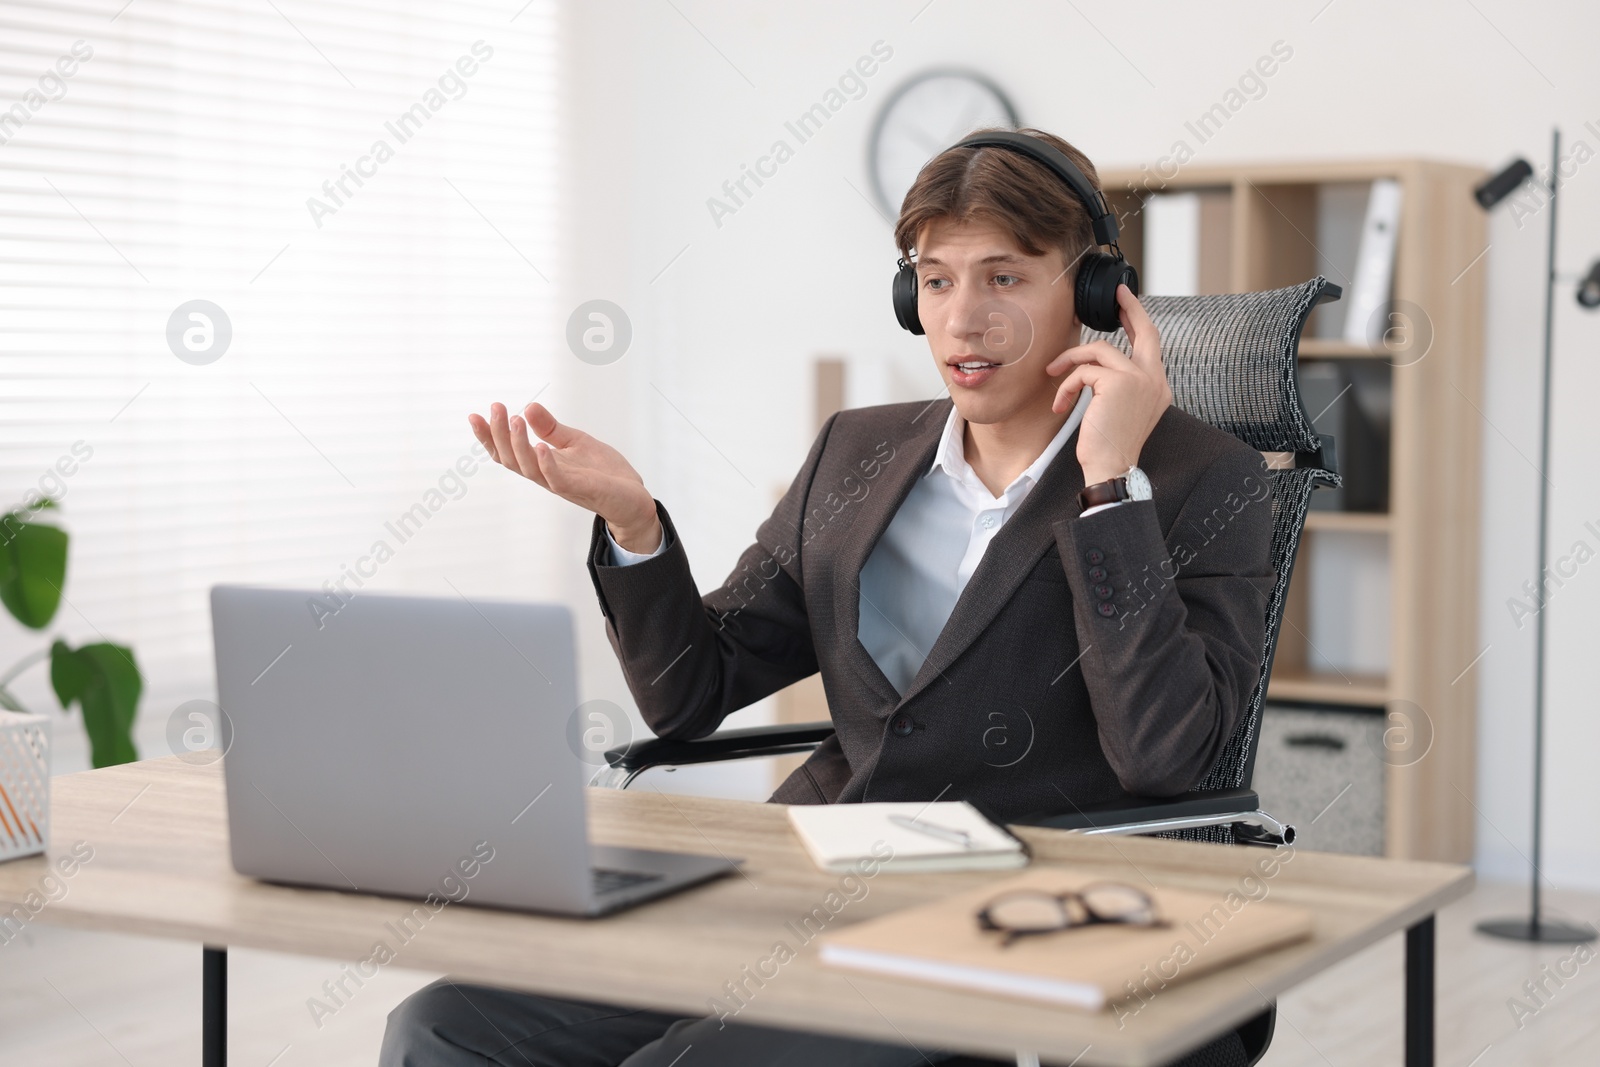 Photo of Man in headphones using video chat during webinar at wooden table in office